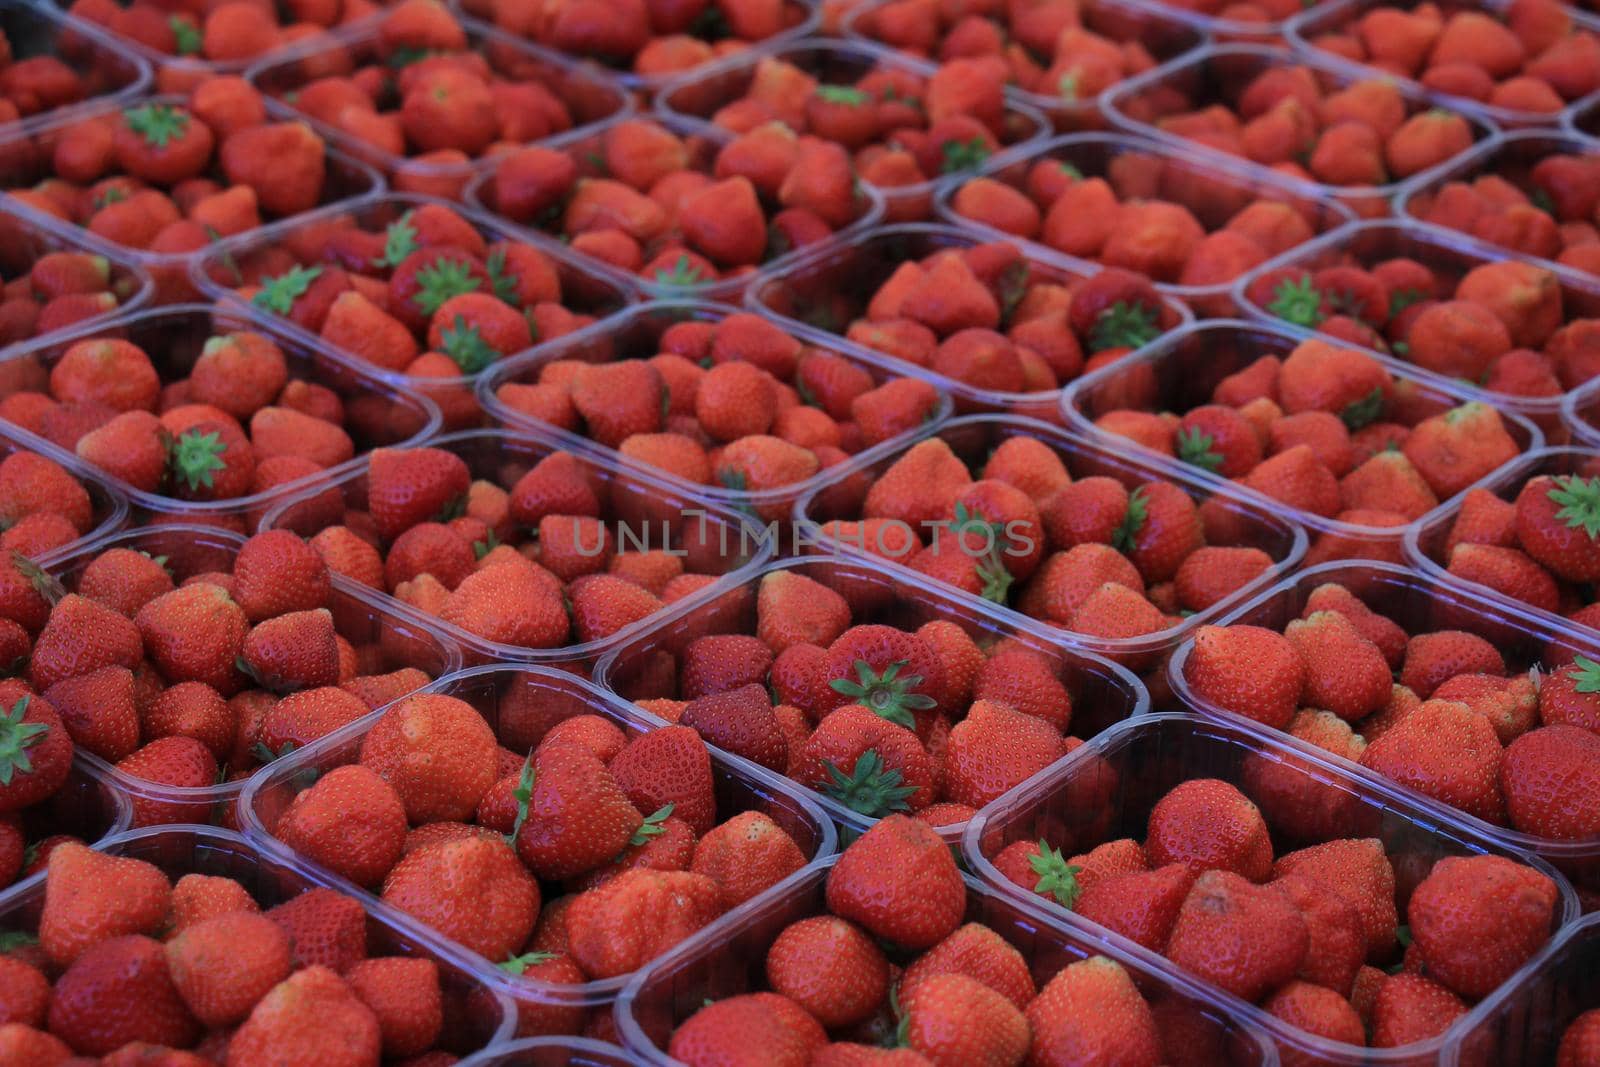 Strawberries in small plastic containers on a market stall